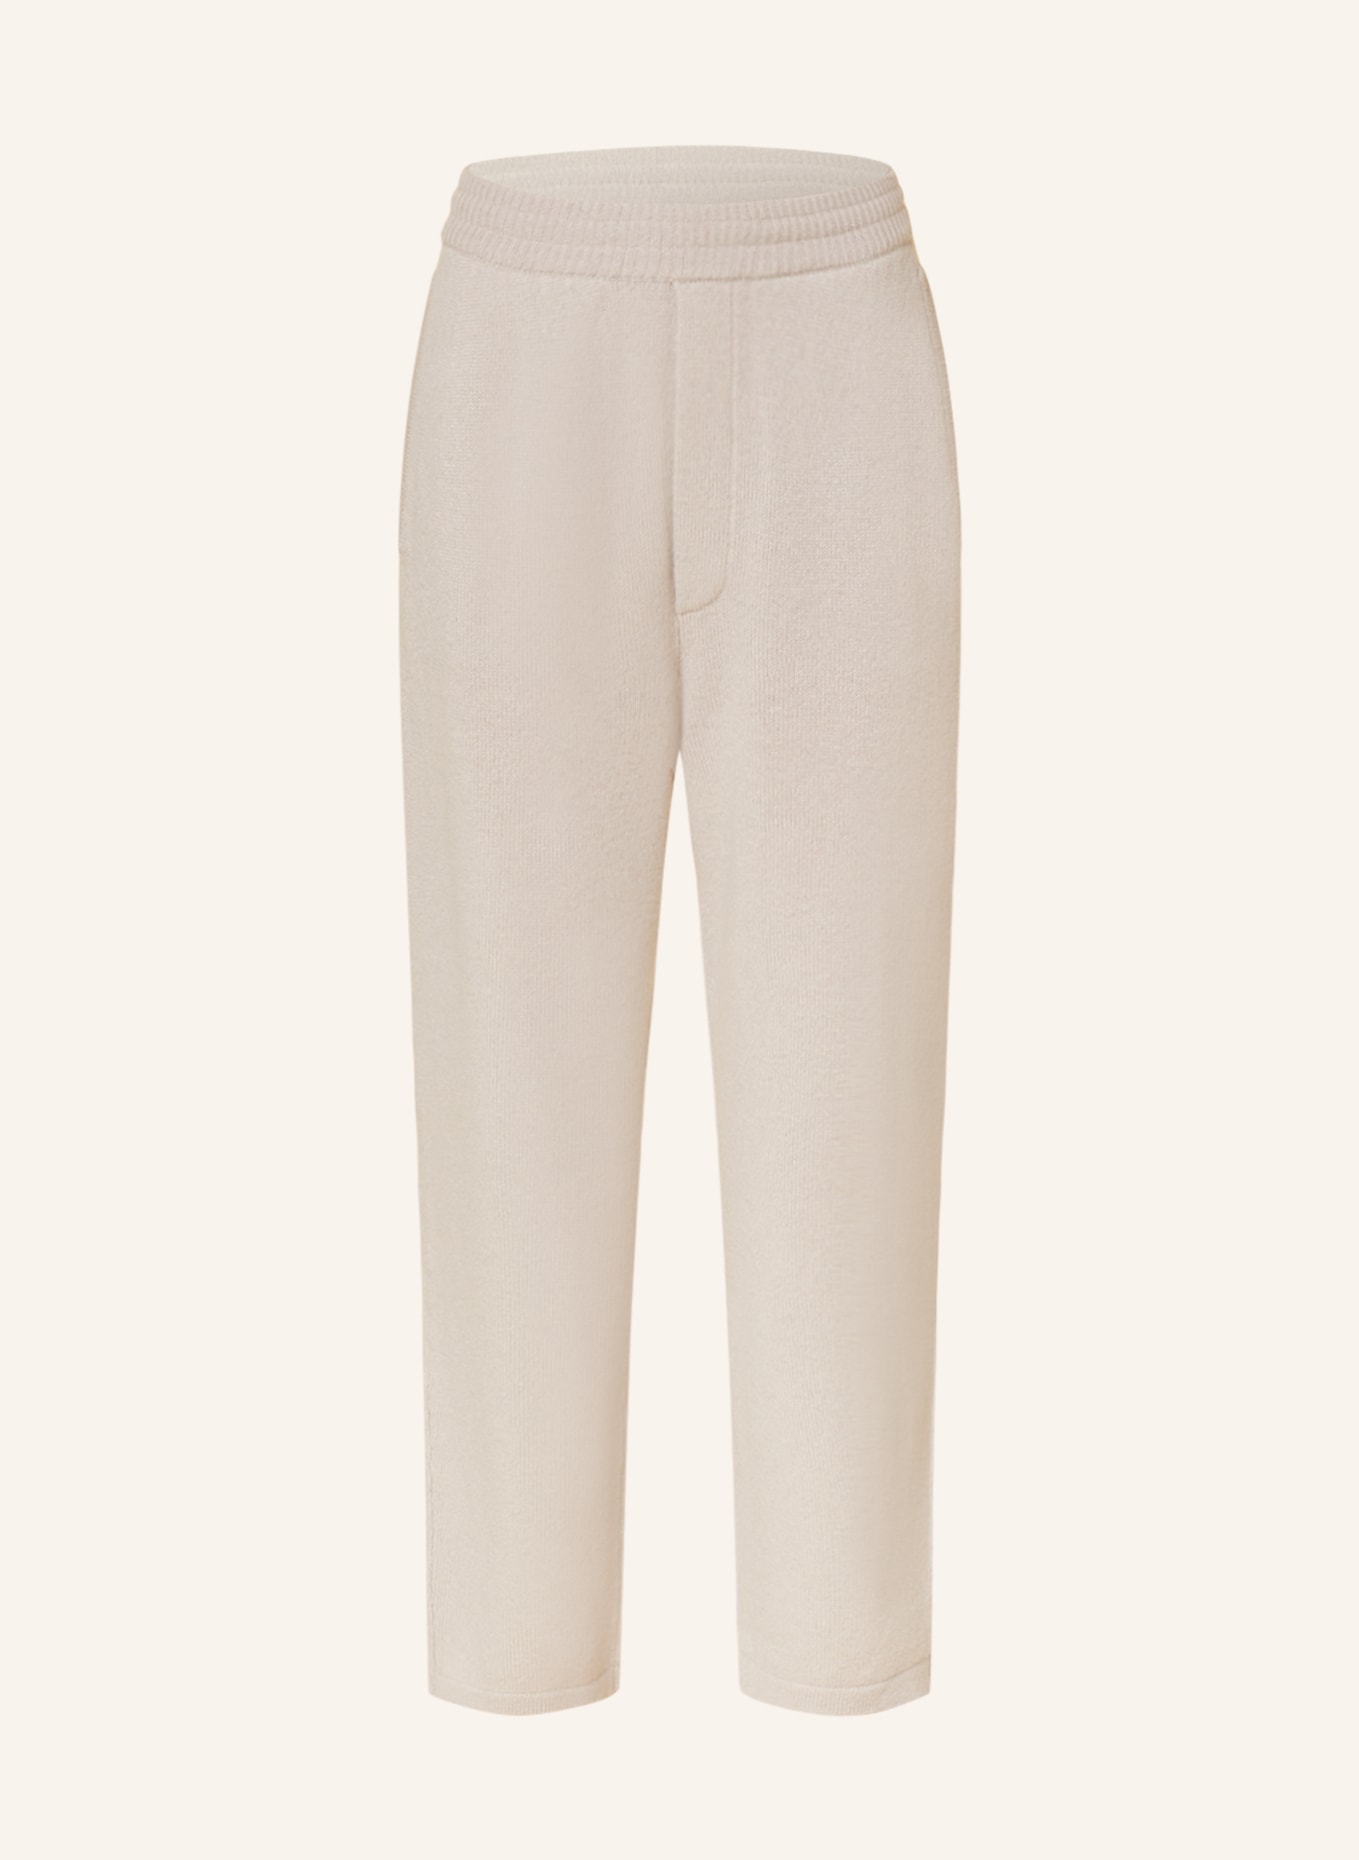 LISA YANG Knit trousers SUNDAY in jogger style in cashmere, Color: LIGHT GRAY (Image 1)